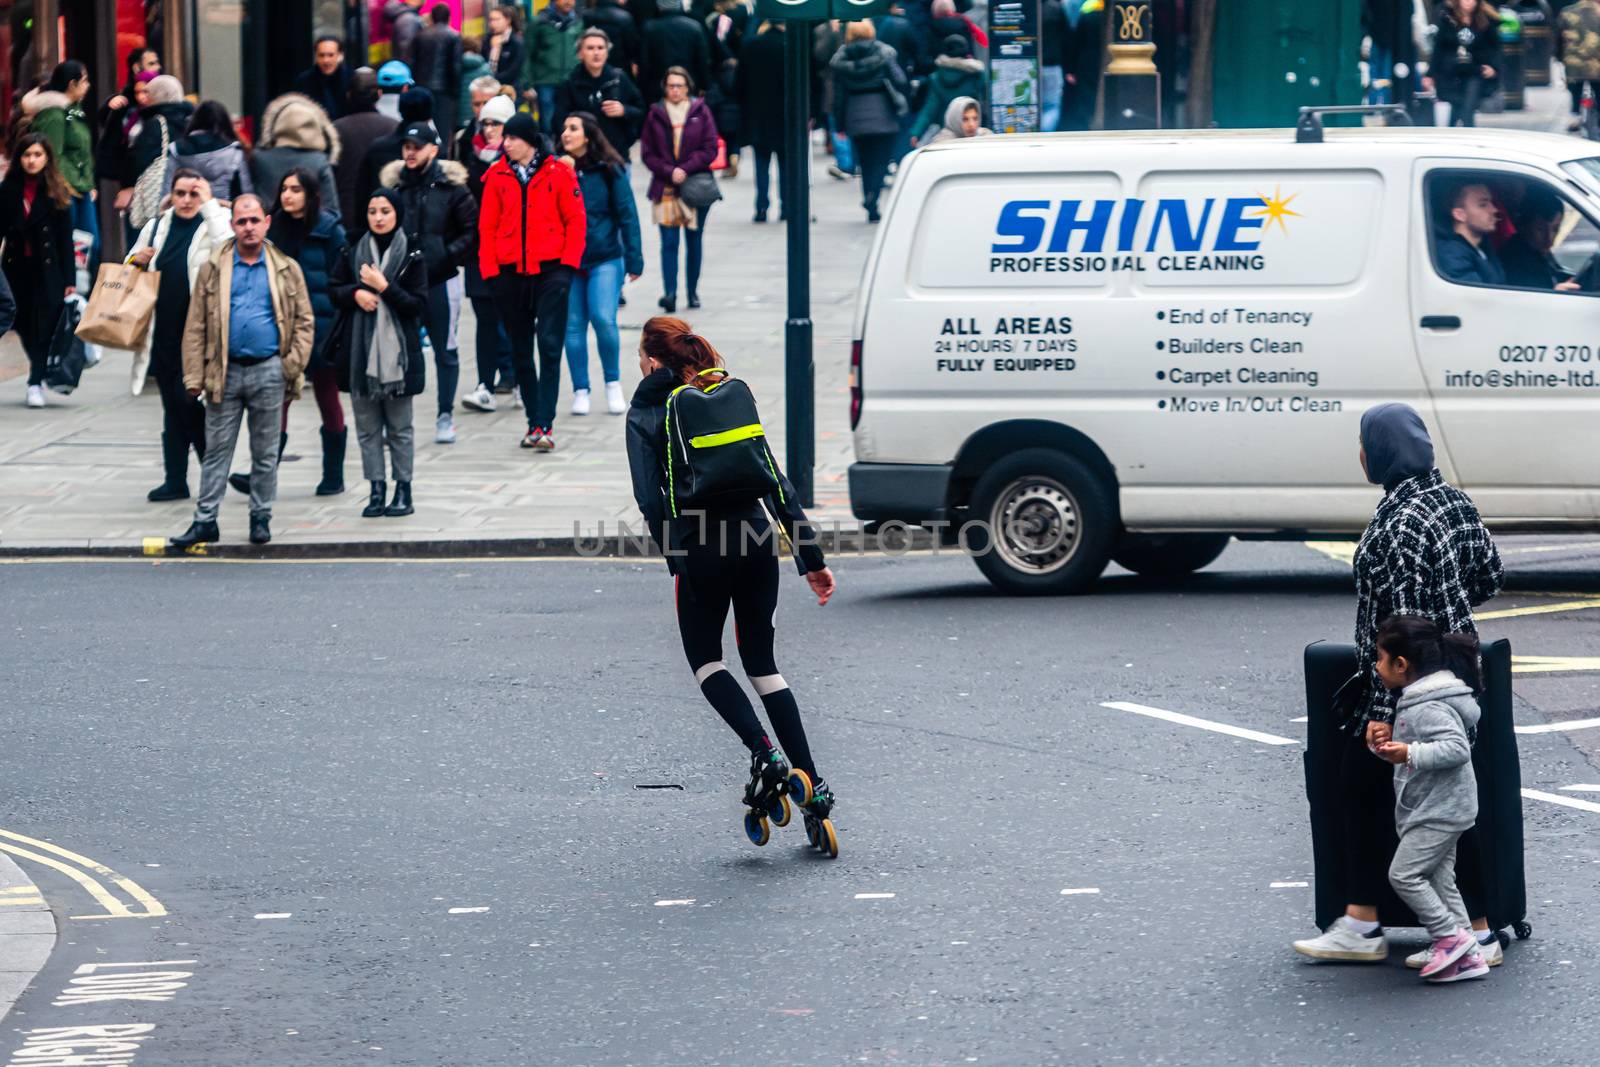 London, England, UK - January 2, 2020: women in roller skates at the intersection of central London streets